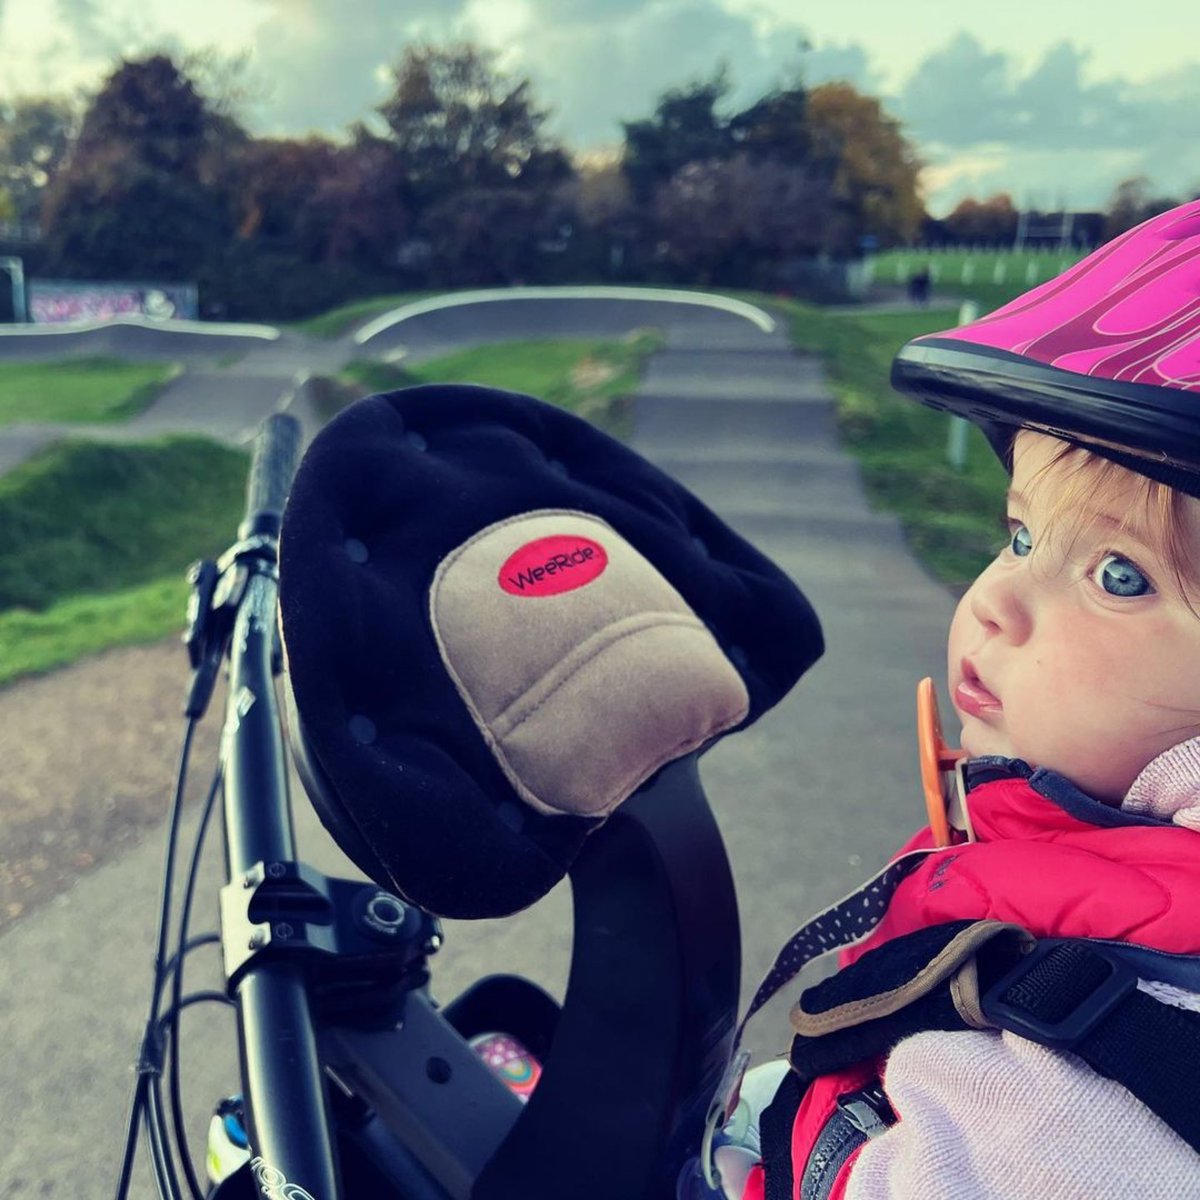 Happy Monday! 🌟

Who’s ready for a week of #WeeRide adventures then? 

📷: royal_worth (instagram)

#weerideadventures #familybiking #nature #outdoorfamilies #outdoor #outside #bikeseat #babybikeseat #toddlerbikeseat #cyclingfamily #getoutside